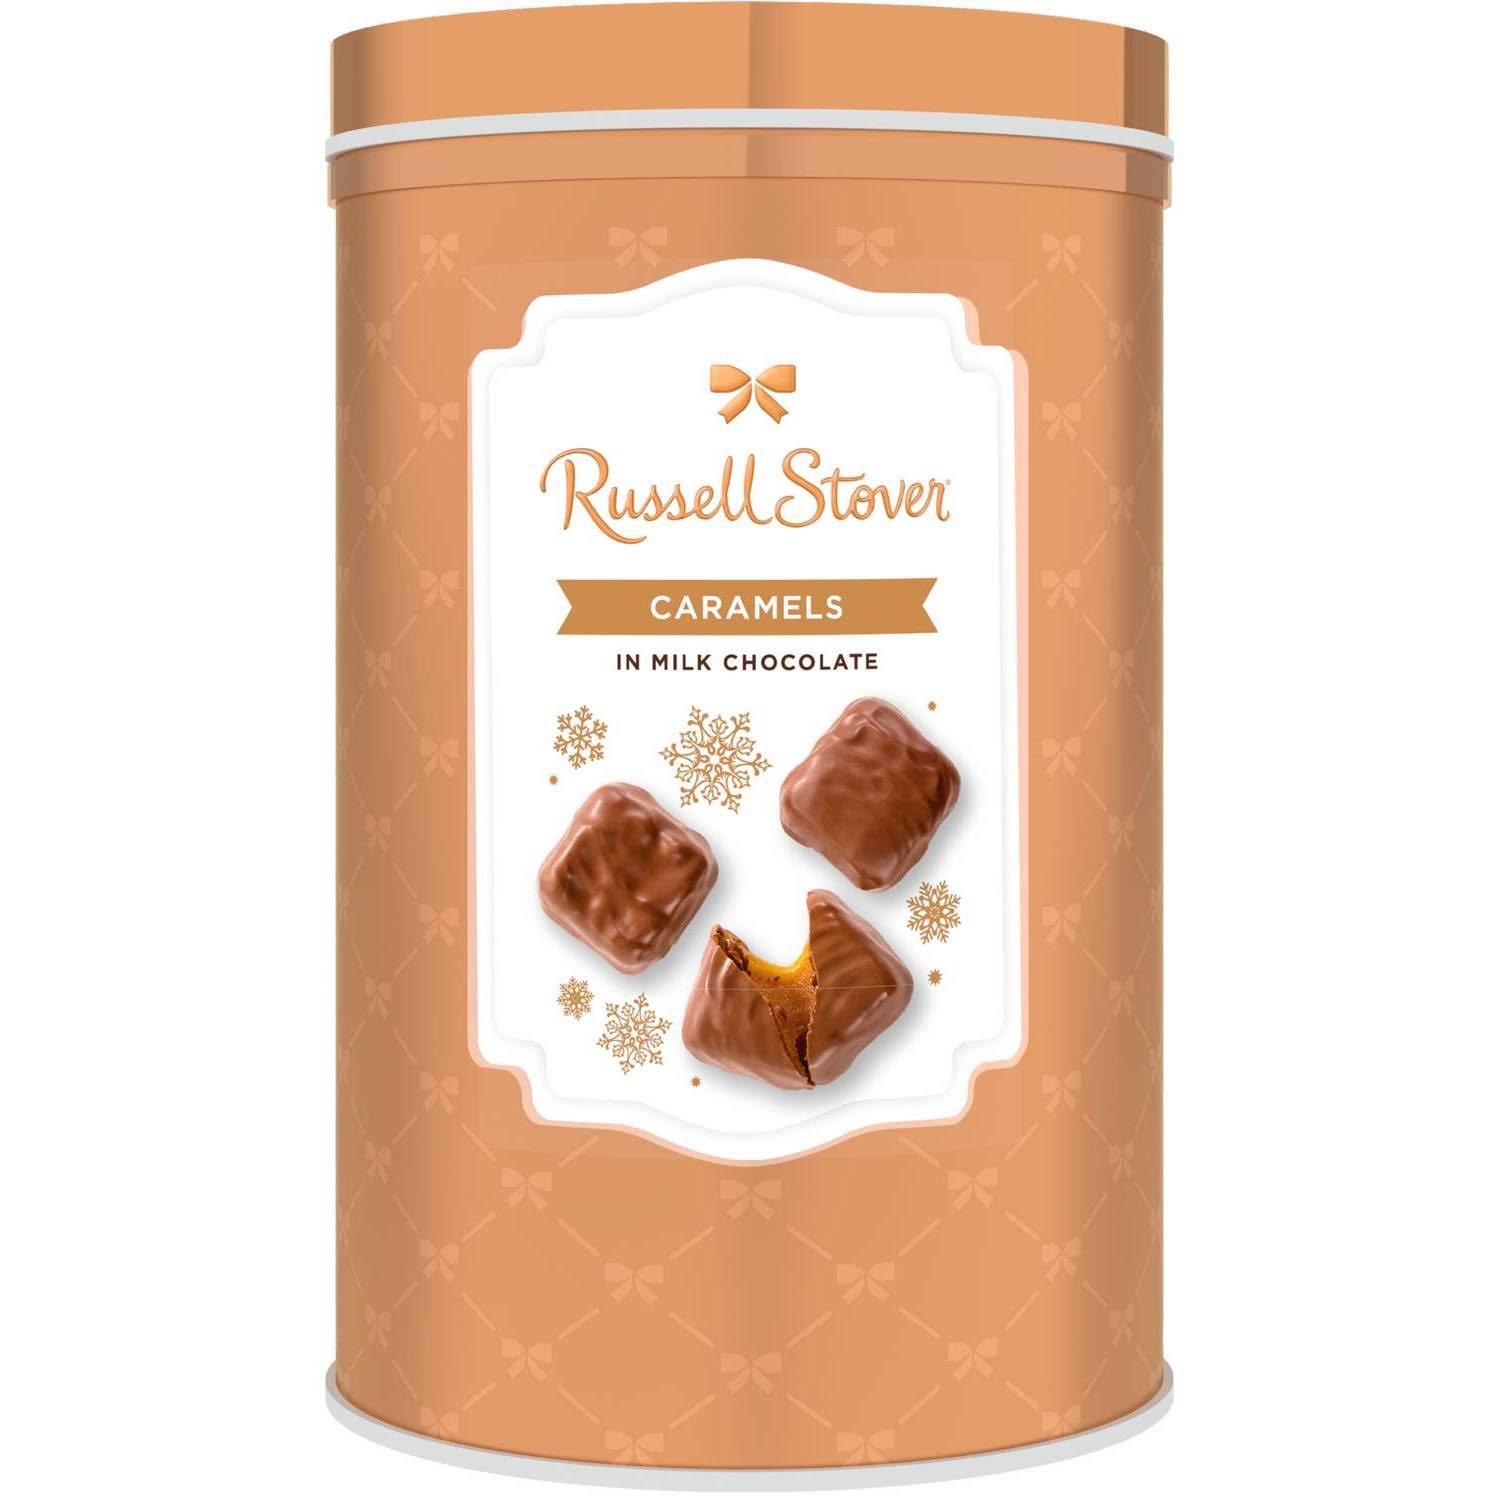 Russell Stover Caramels in Milk Chocolate - 9.5oz